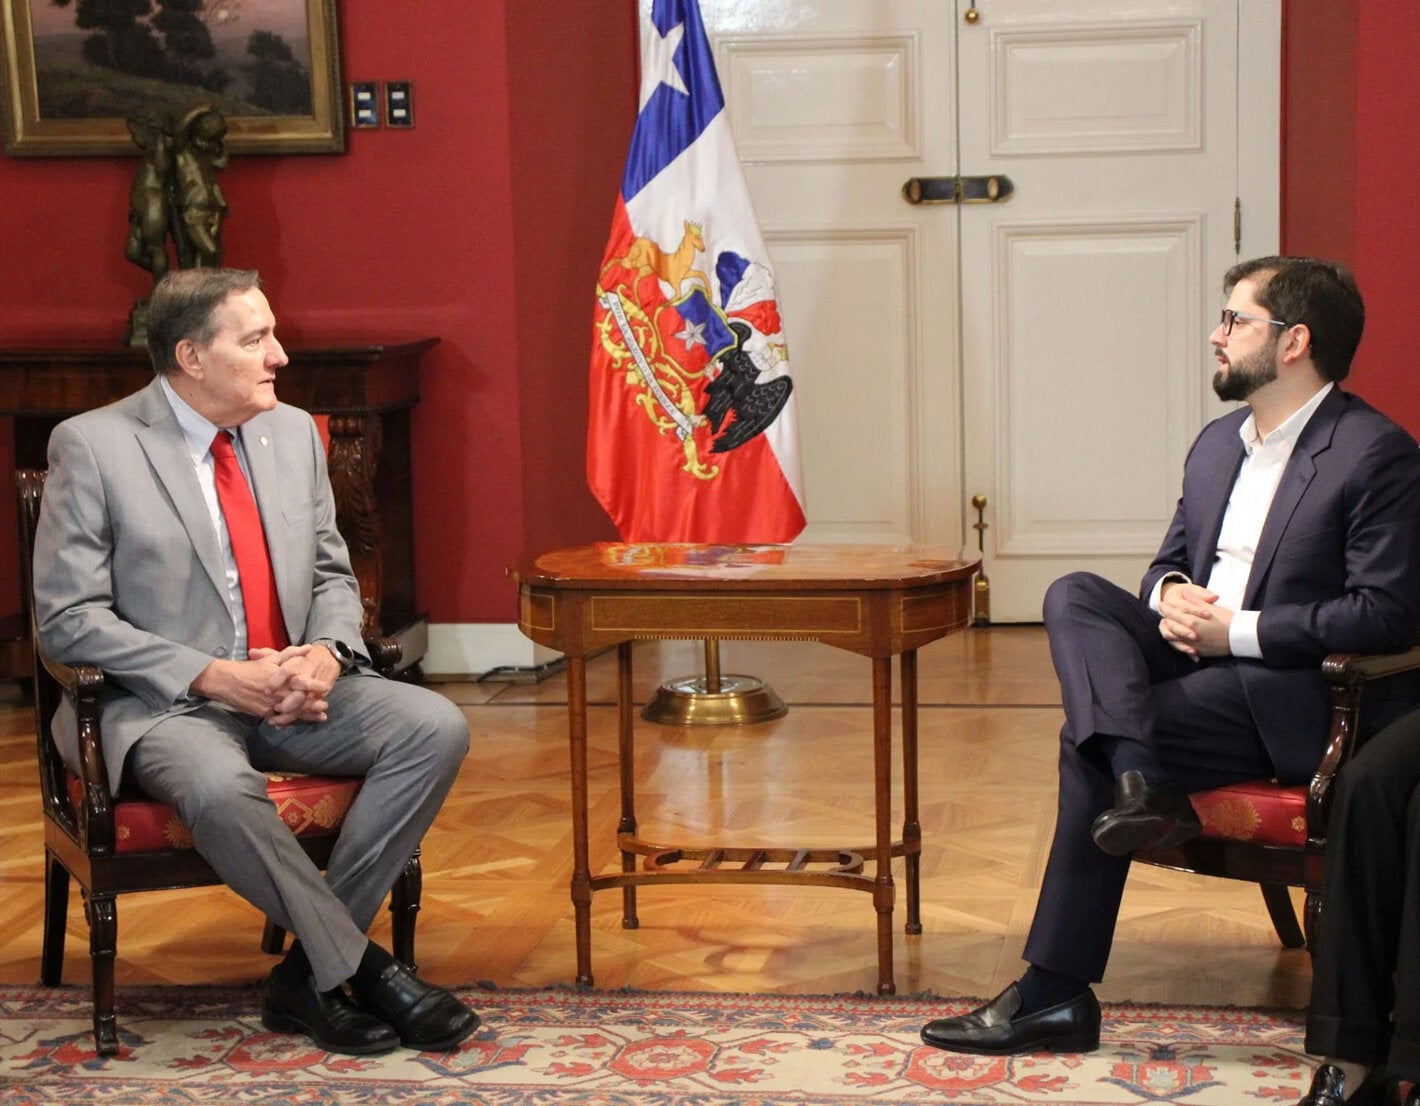 In Chile, PAHO Director meets President Boric